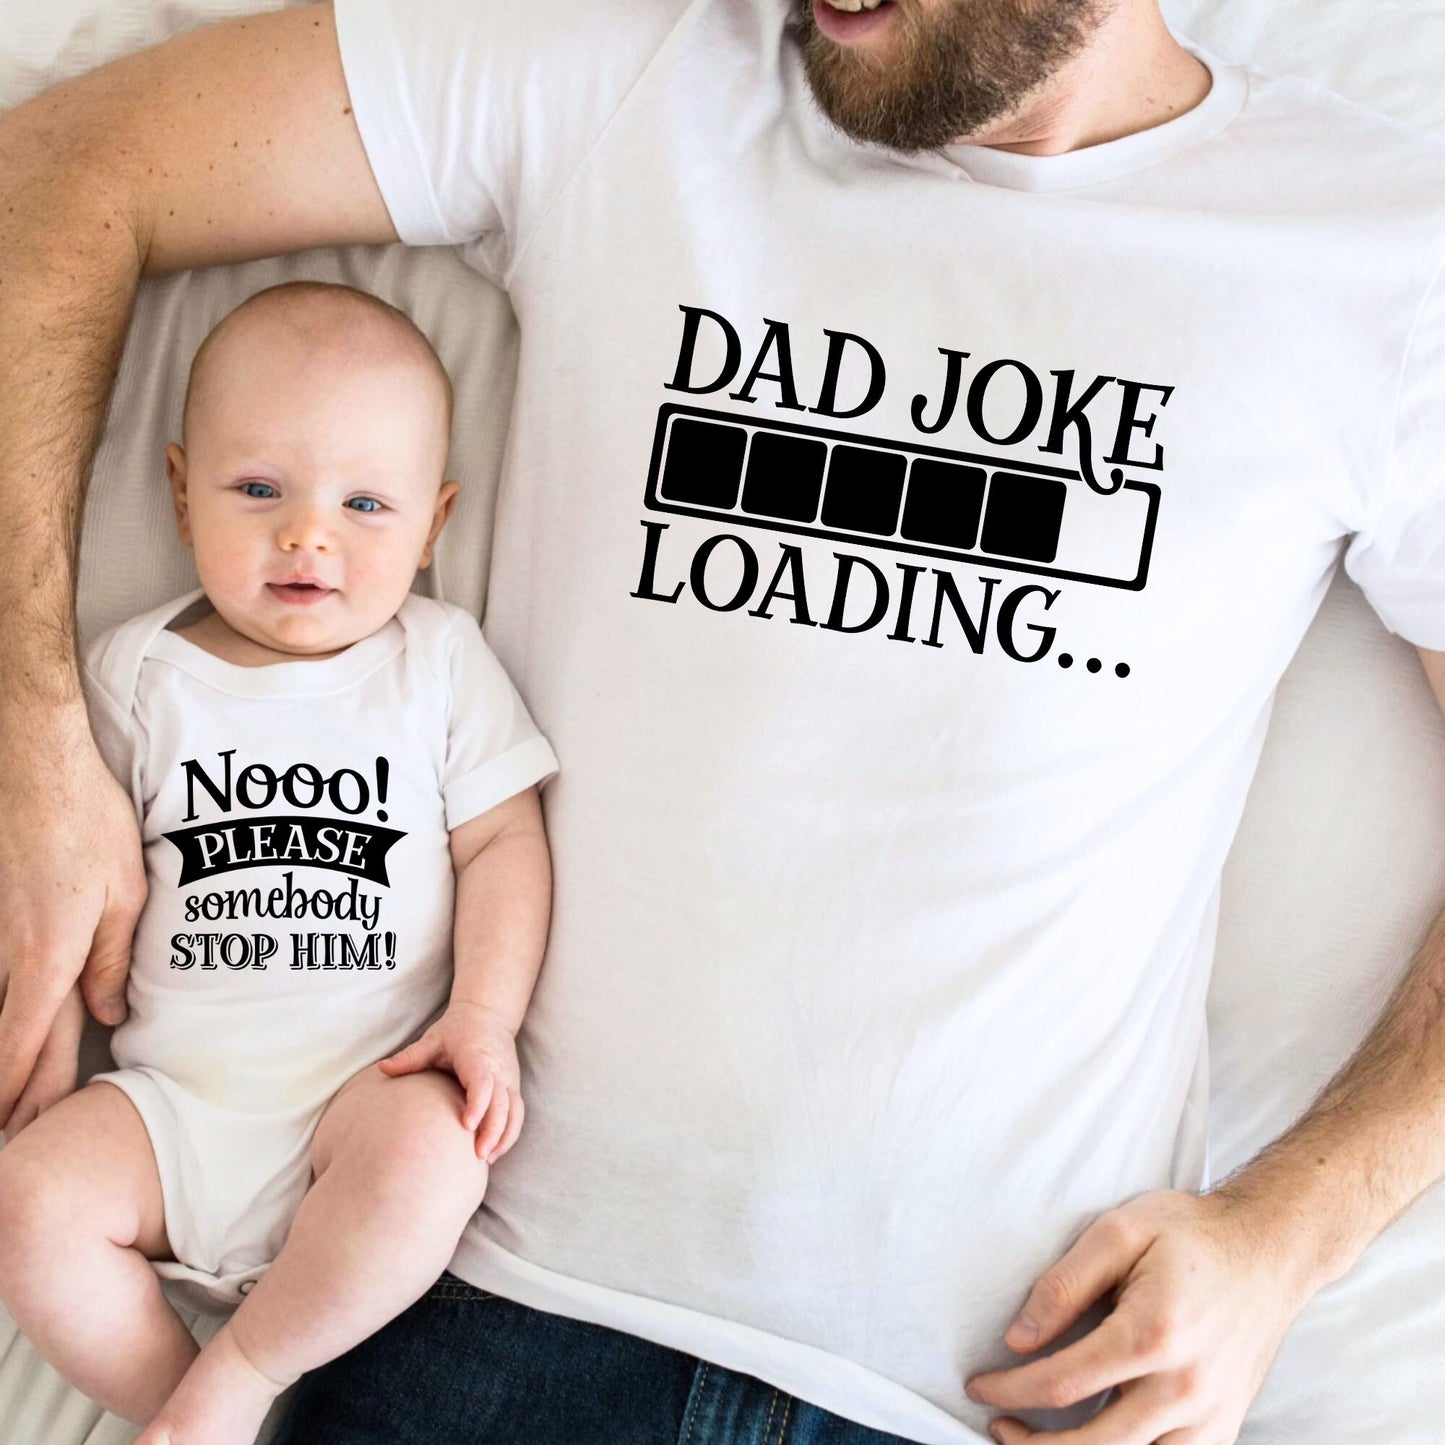 Dad Joke Loading - Matching Dad and Baby Outfits